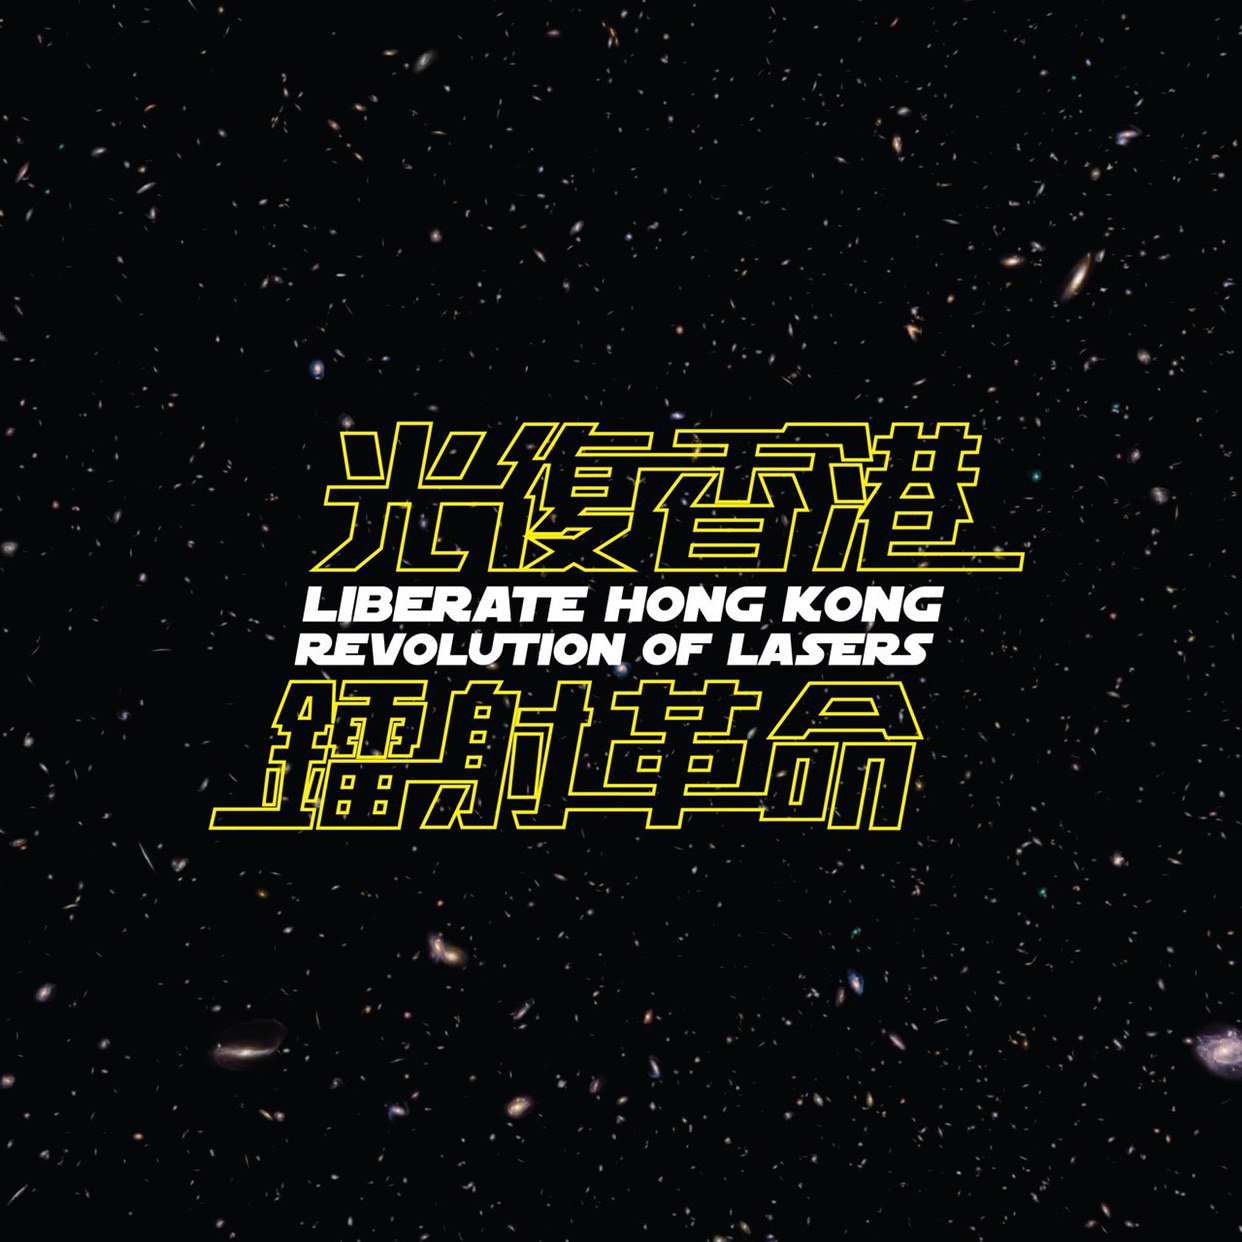 Yellow-outlined Chinese text, and an English translation of the same, overlaid on an image of galaxies in reference to the Star Wars logo. Text reads: Liberate Hong Kong, Revolution of Lasers